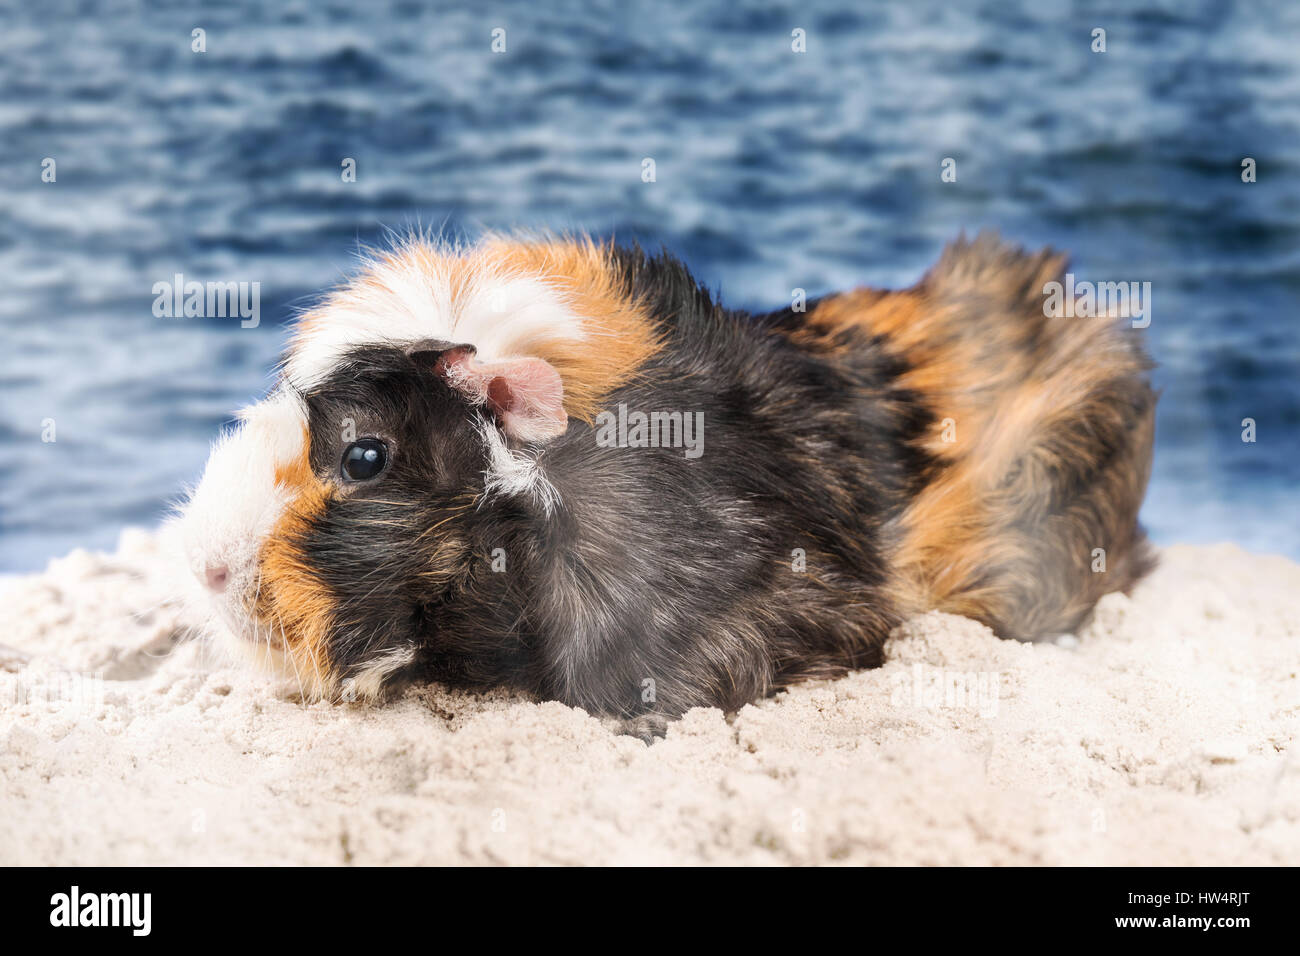 Multicolored beautiful guinea pig standing on wet sand on the seashore Stock Photo